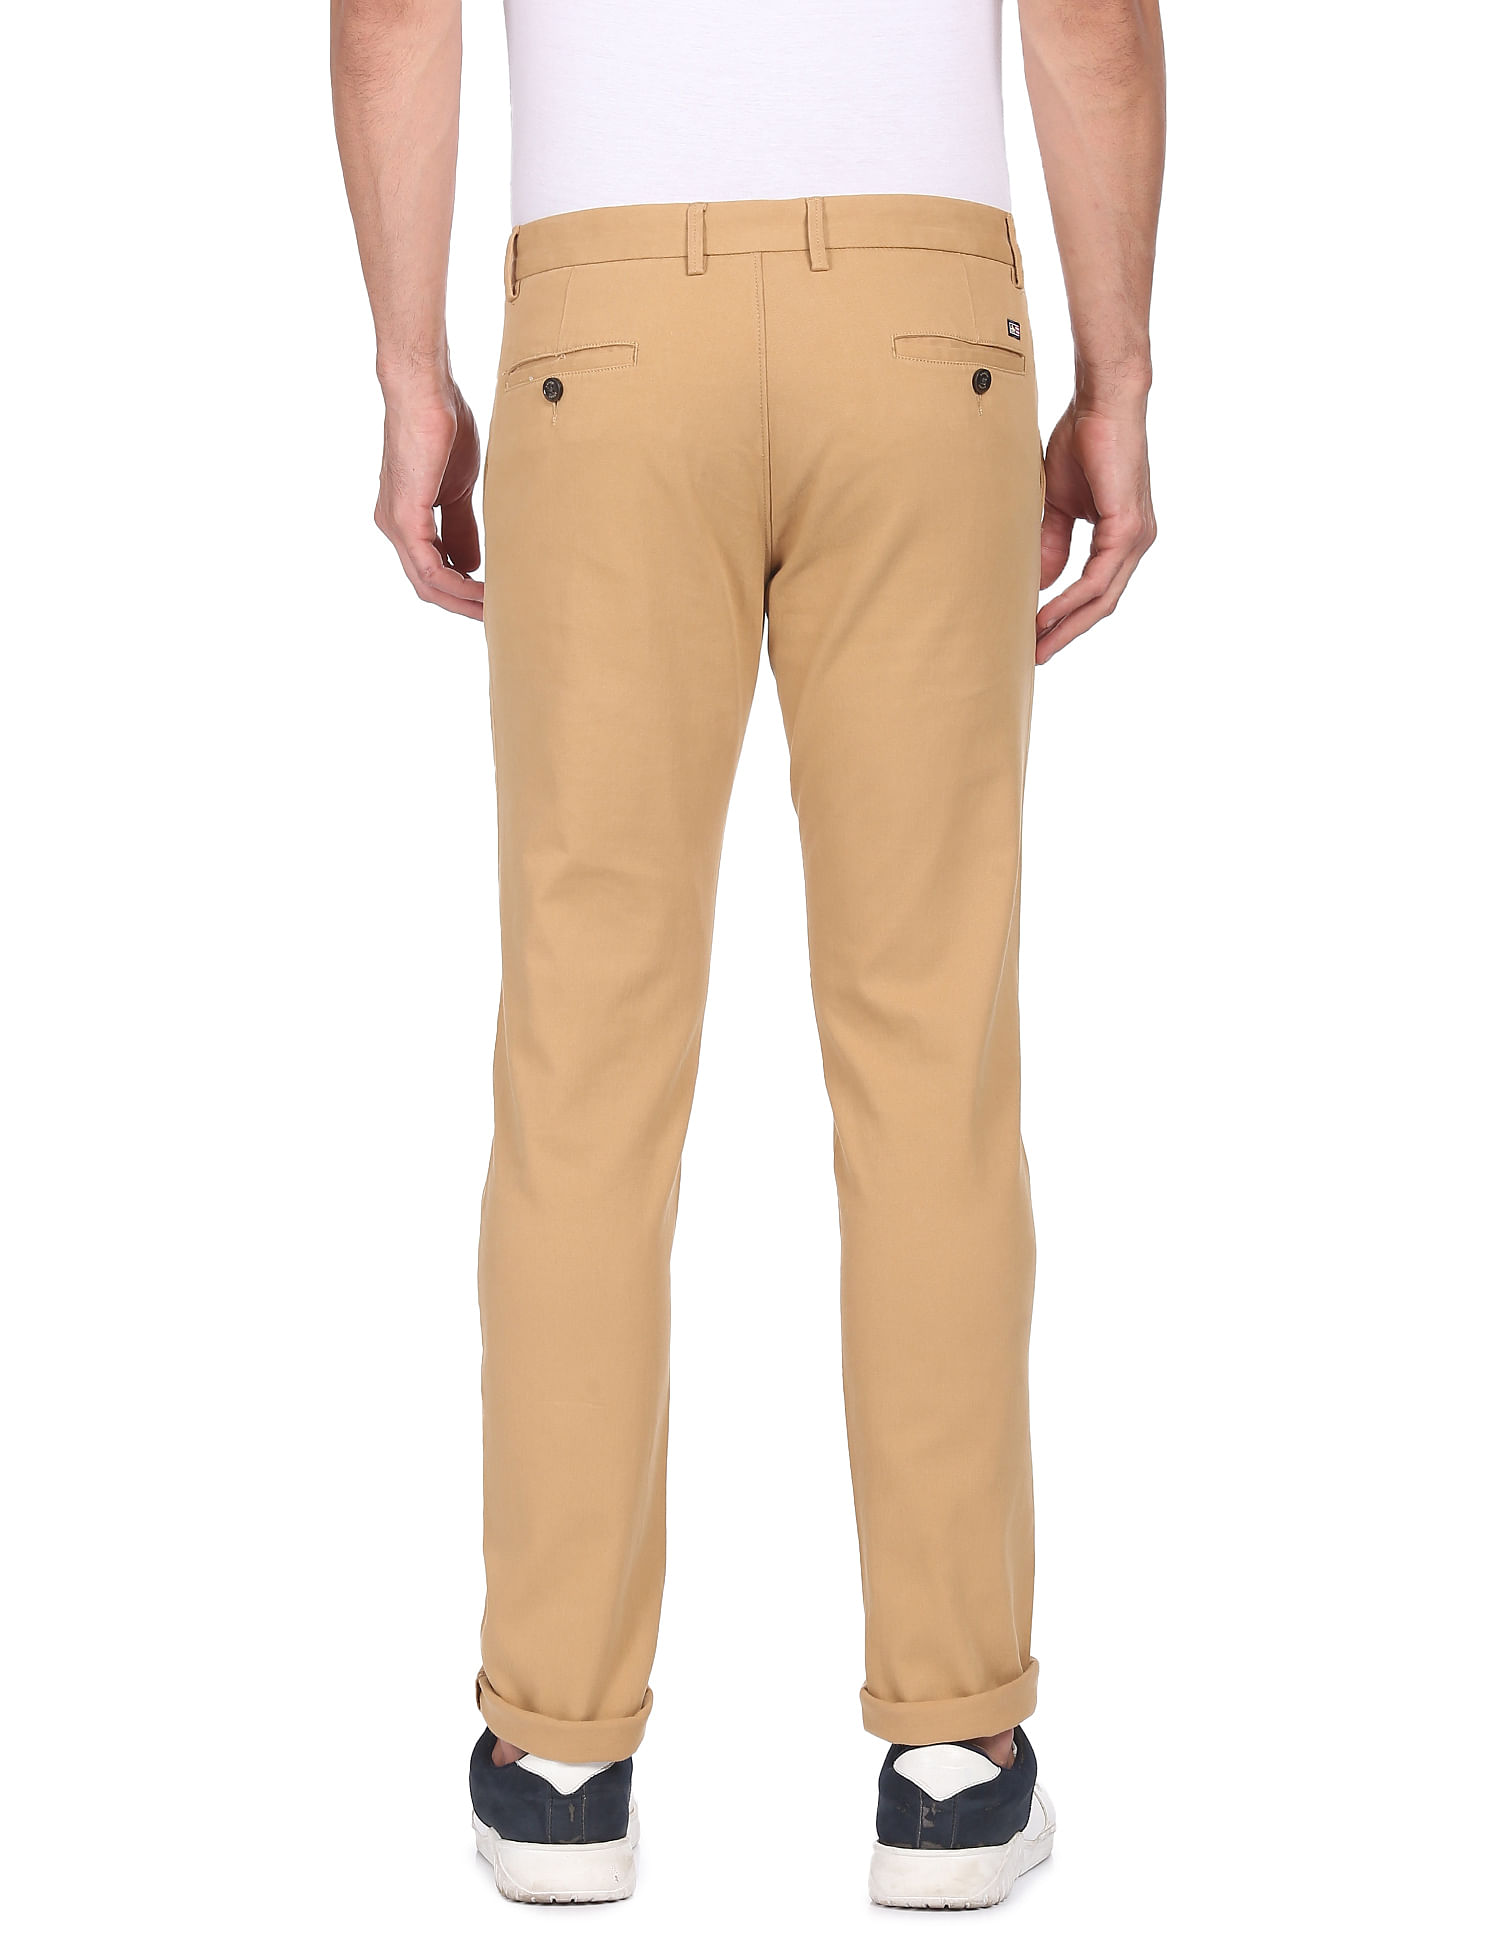 Buy Arrow Flat Front Check Formal Trousers - NNNOW.com